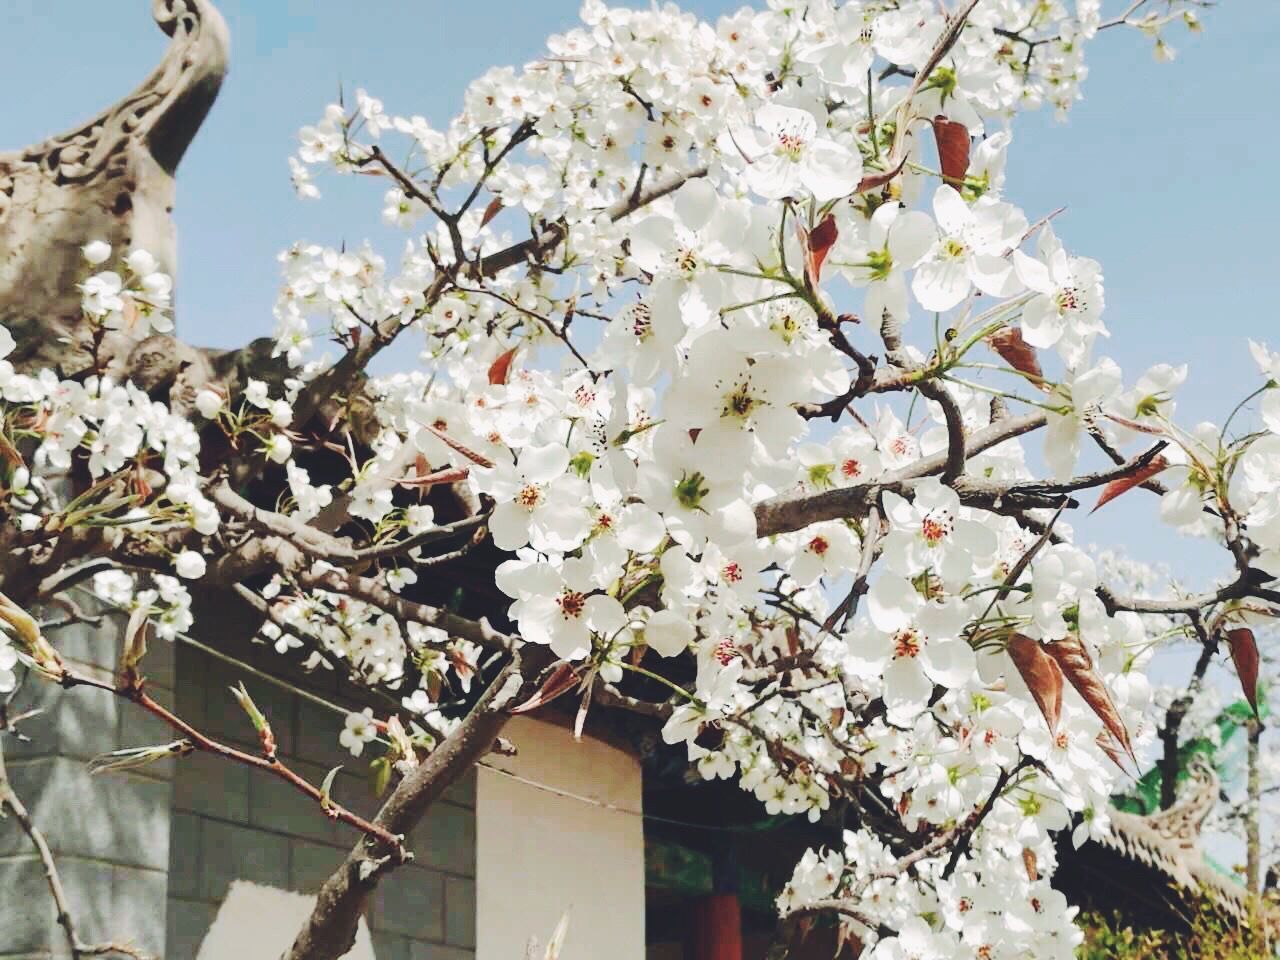 LOW ANGLE VIEW OF BLOSSOMS ON TREE